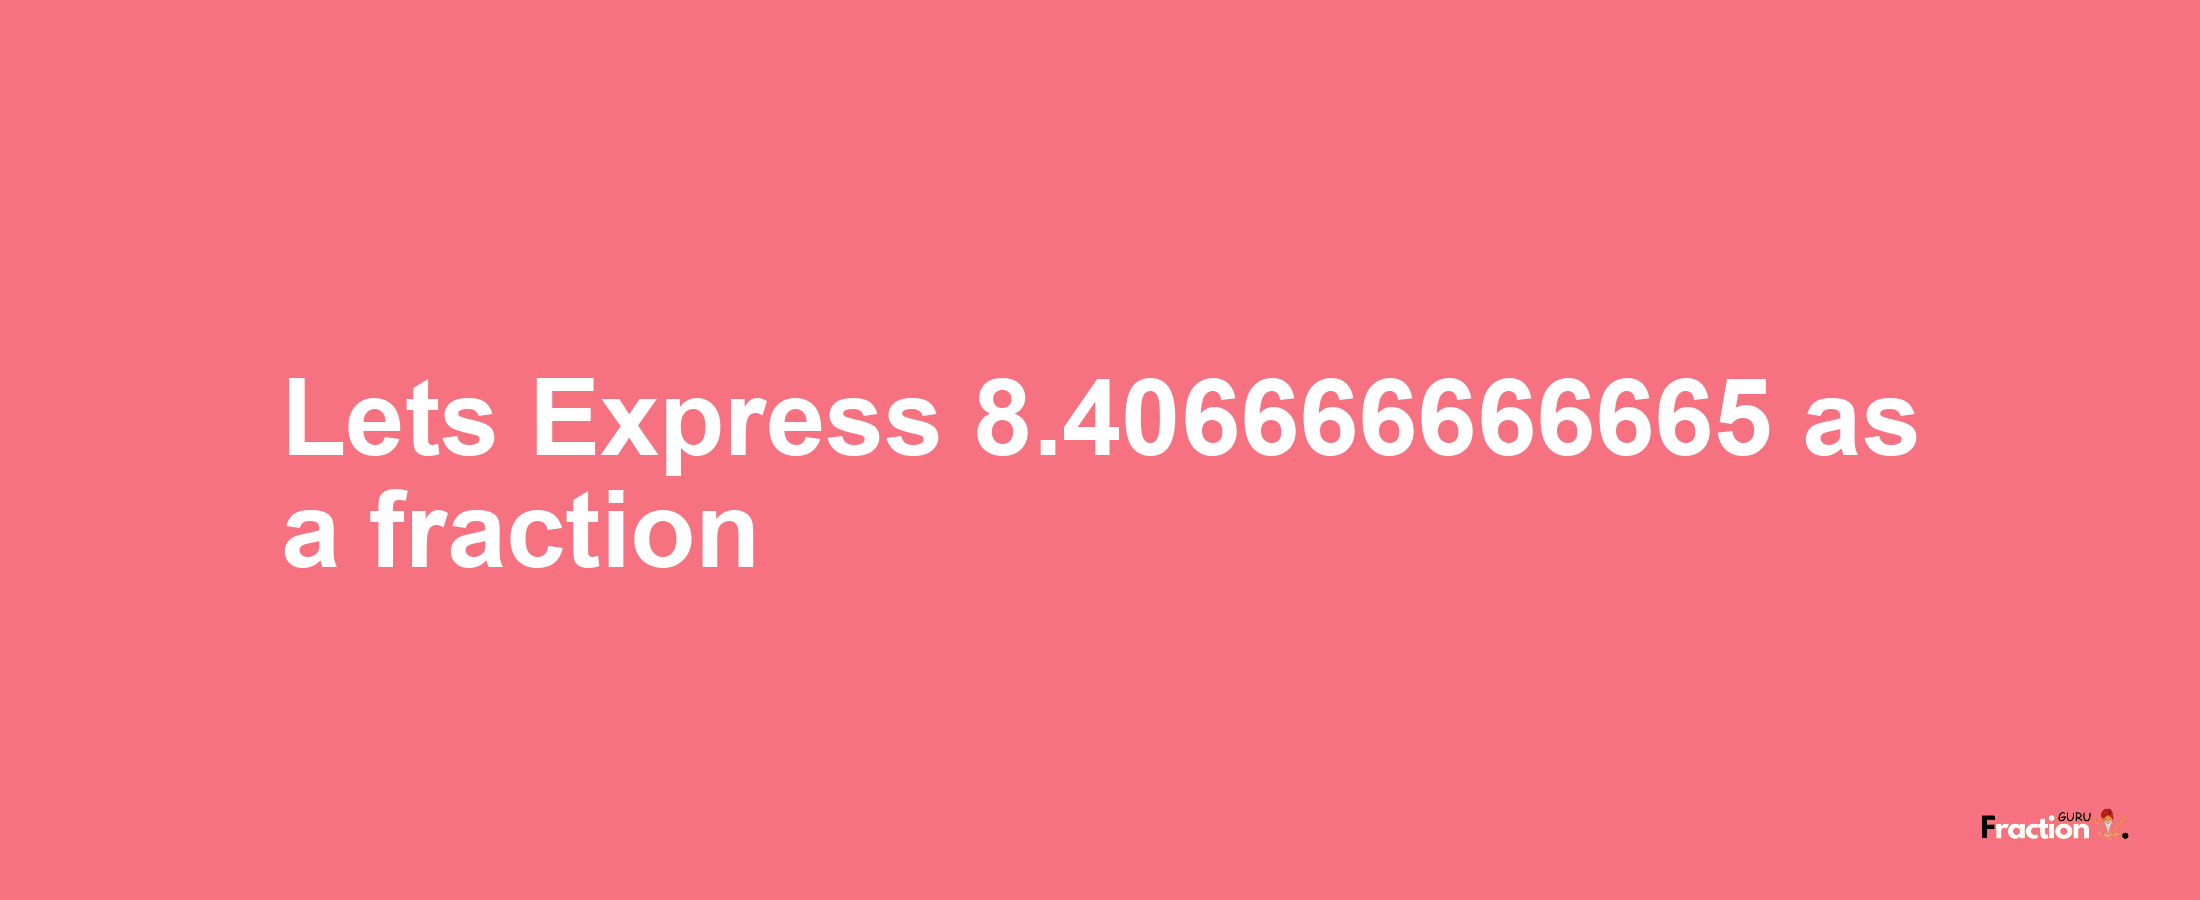 Lets Express 8.406666666665 as afraction